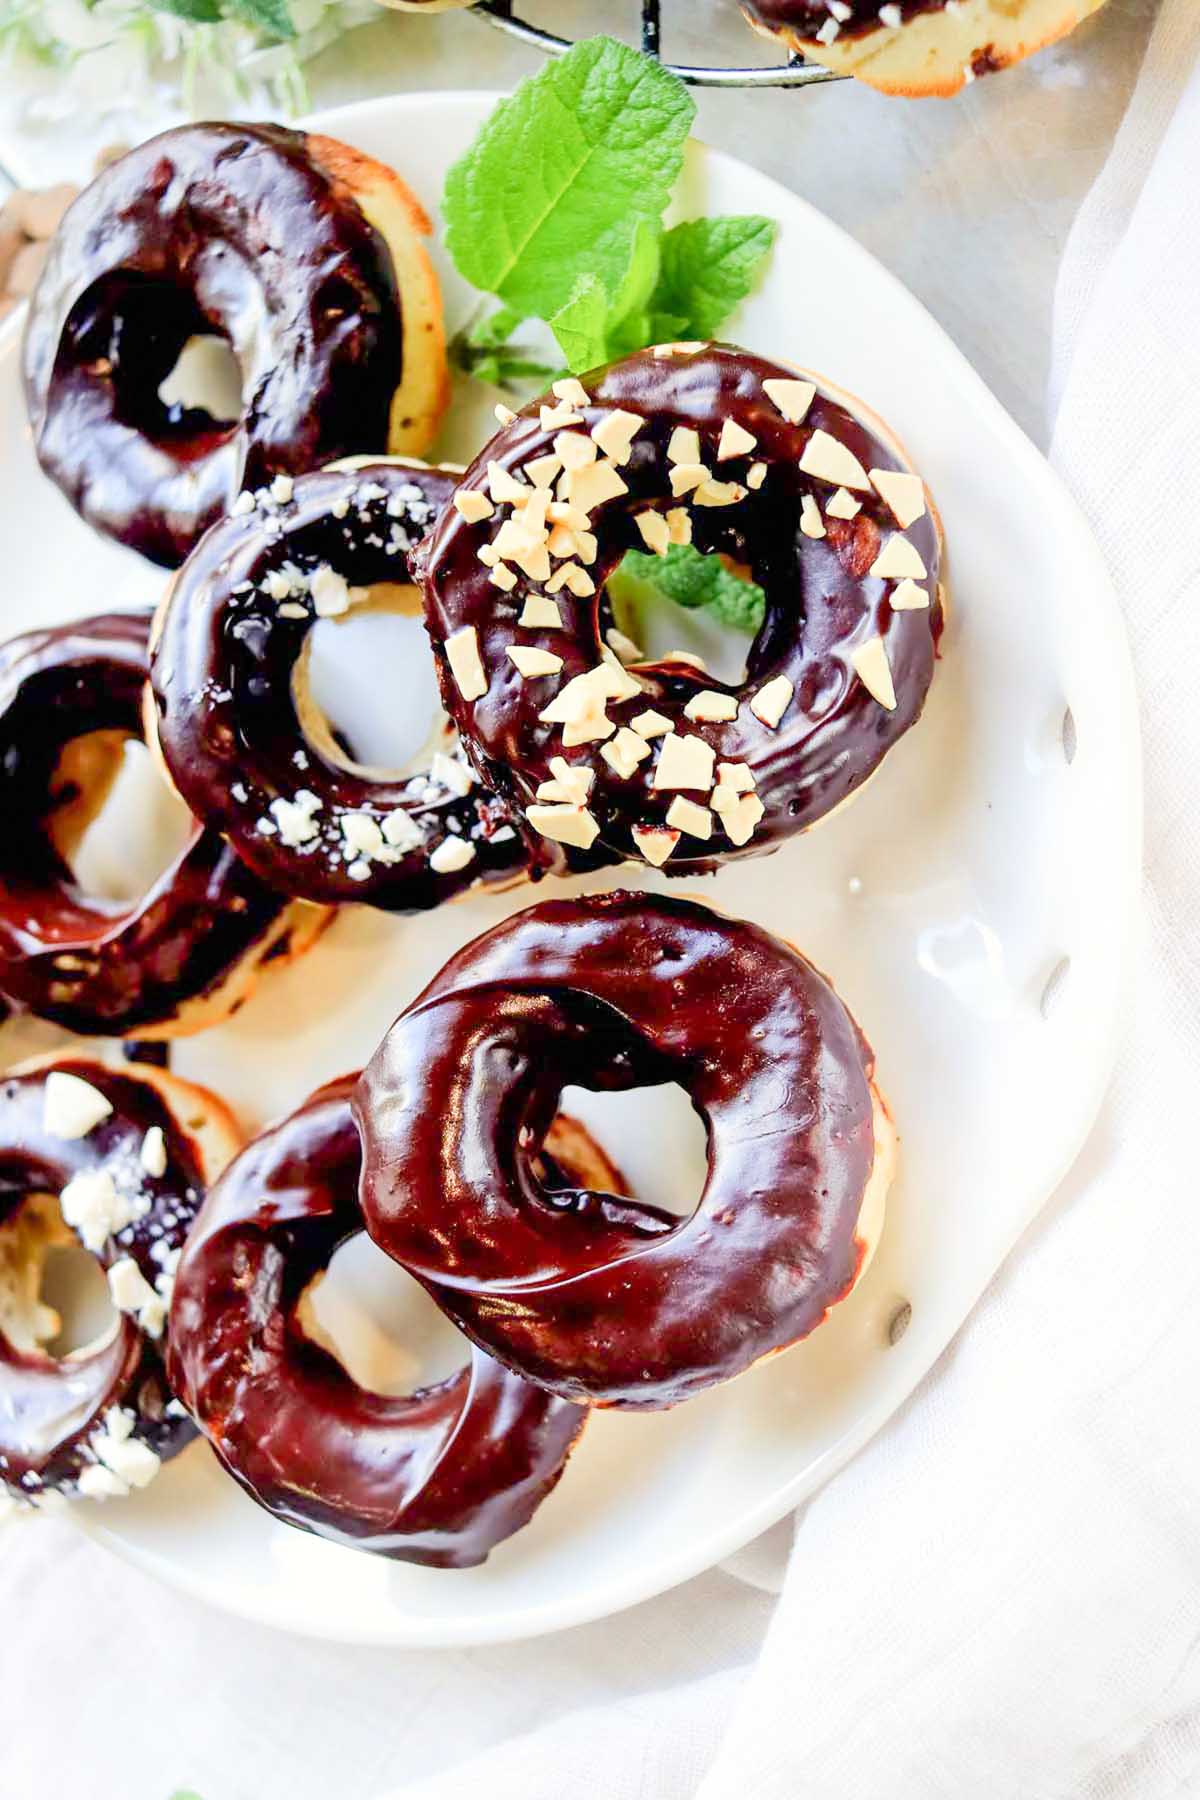 Chocolate frosted donuts sprinkled with chopped nuts.